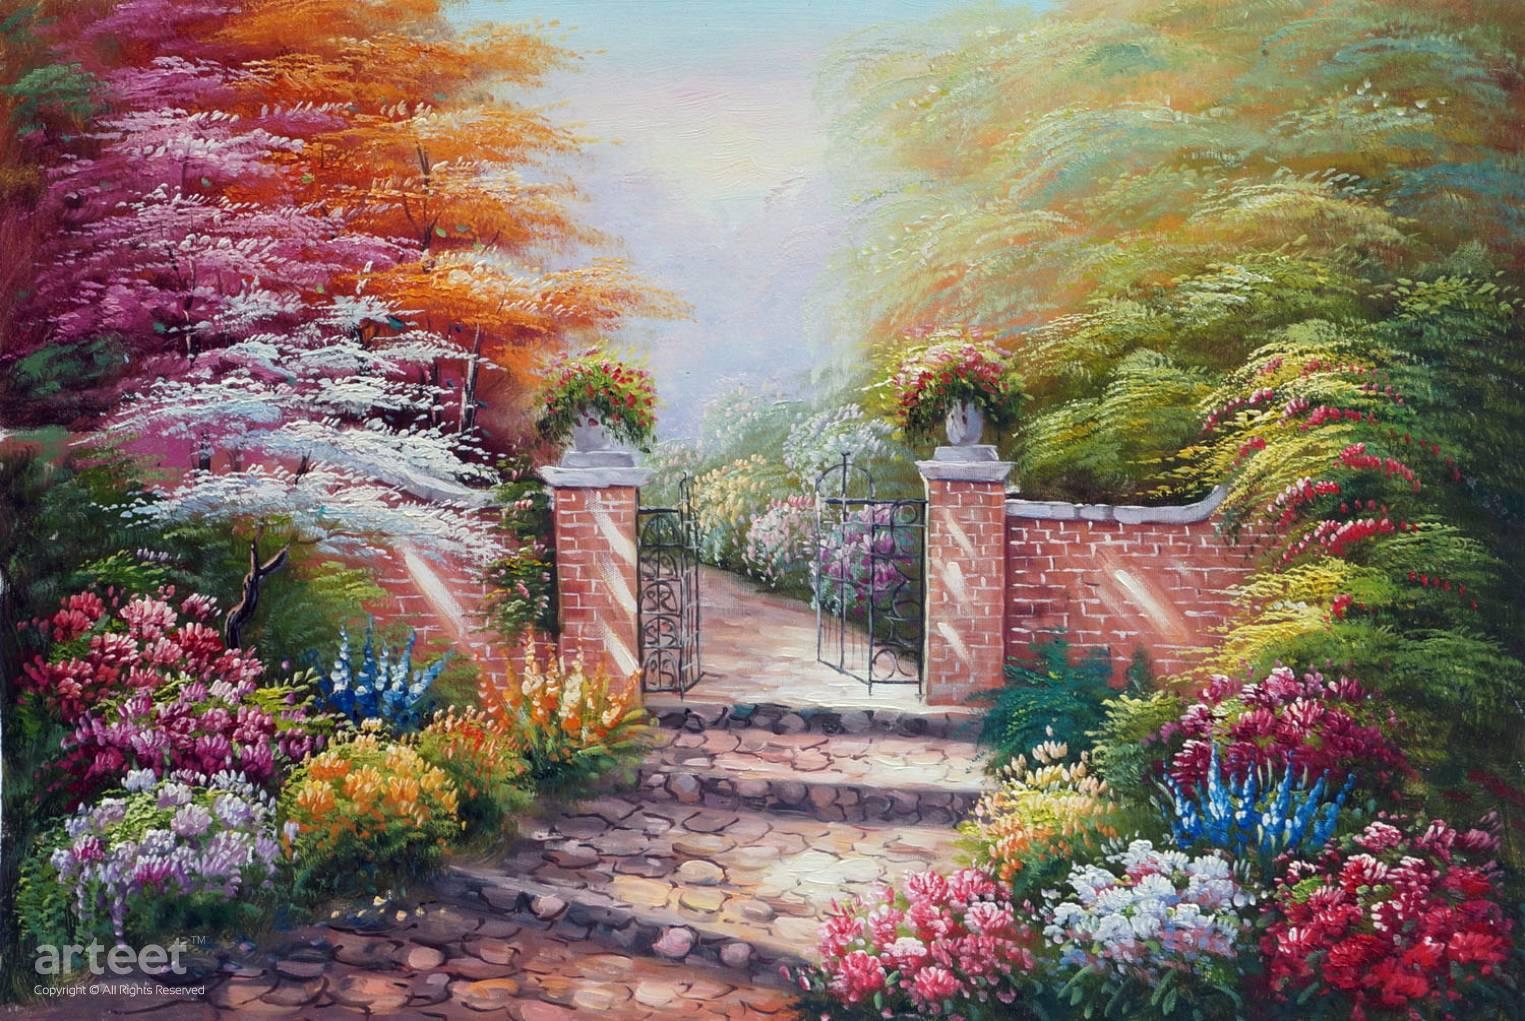 Into the Garden | Art Paintings for Sale, Online Gallery